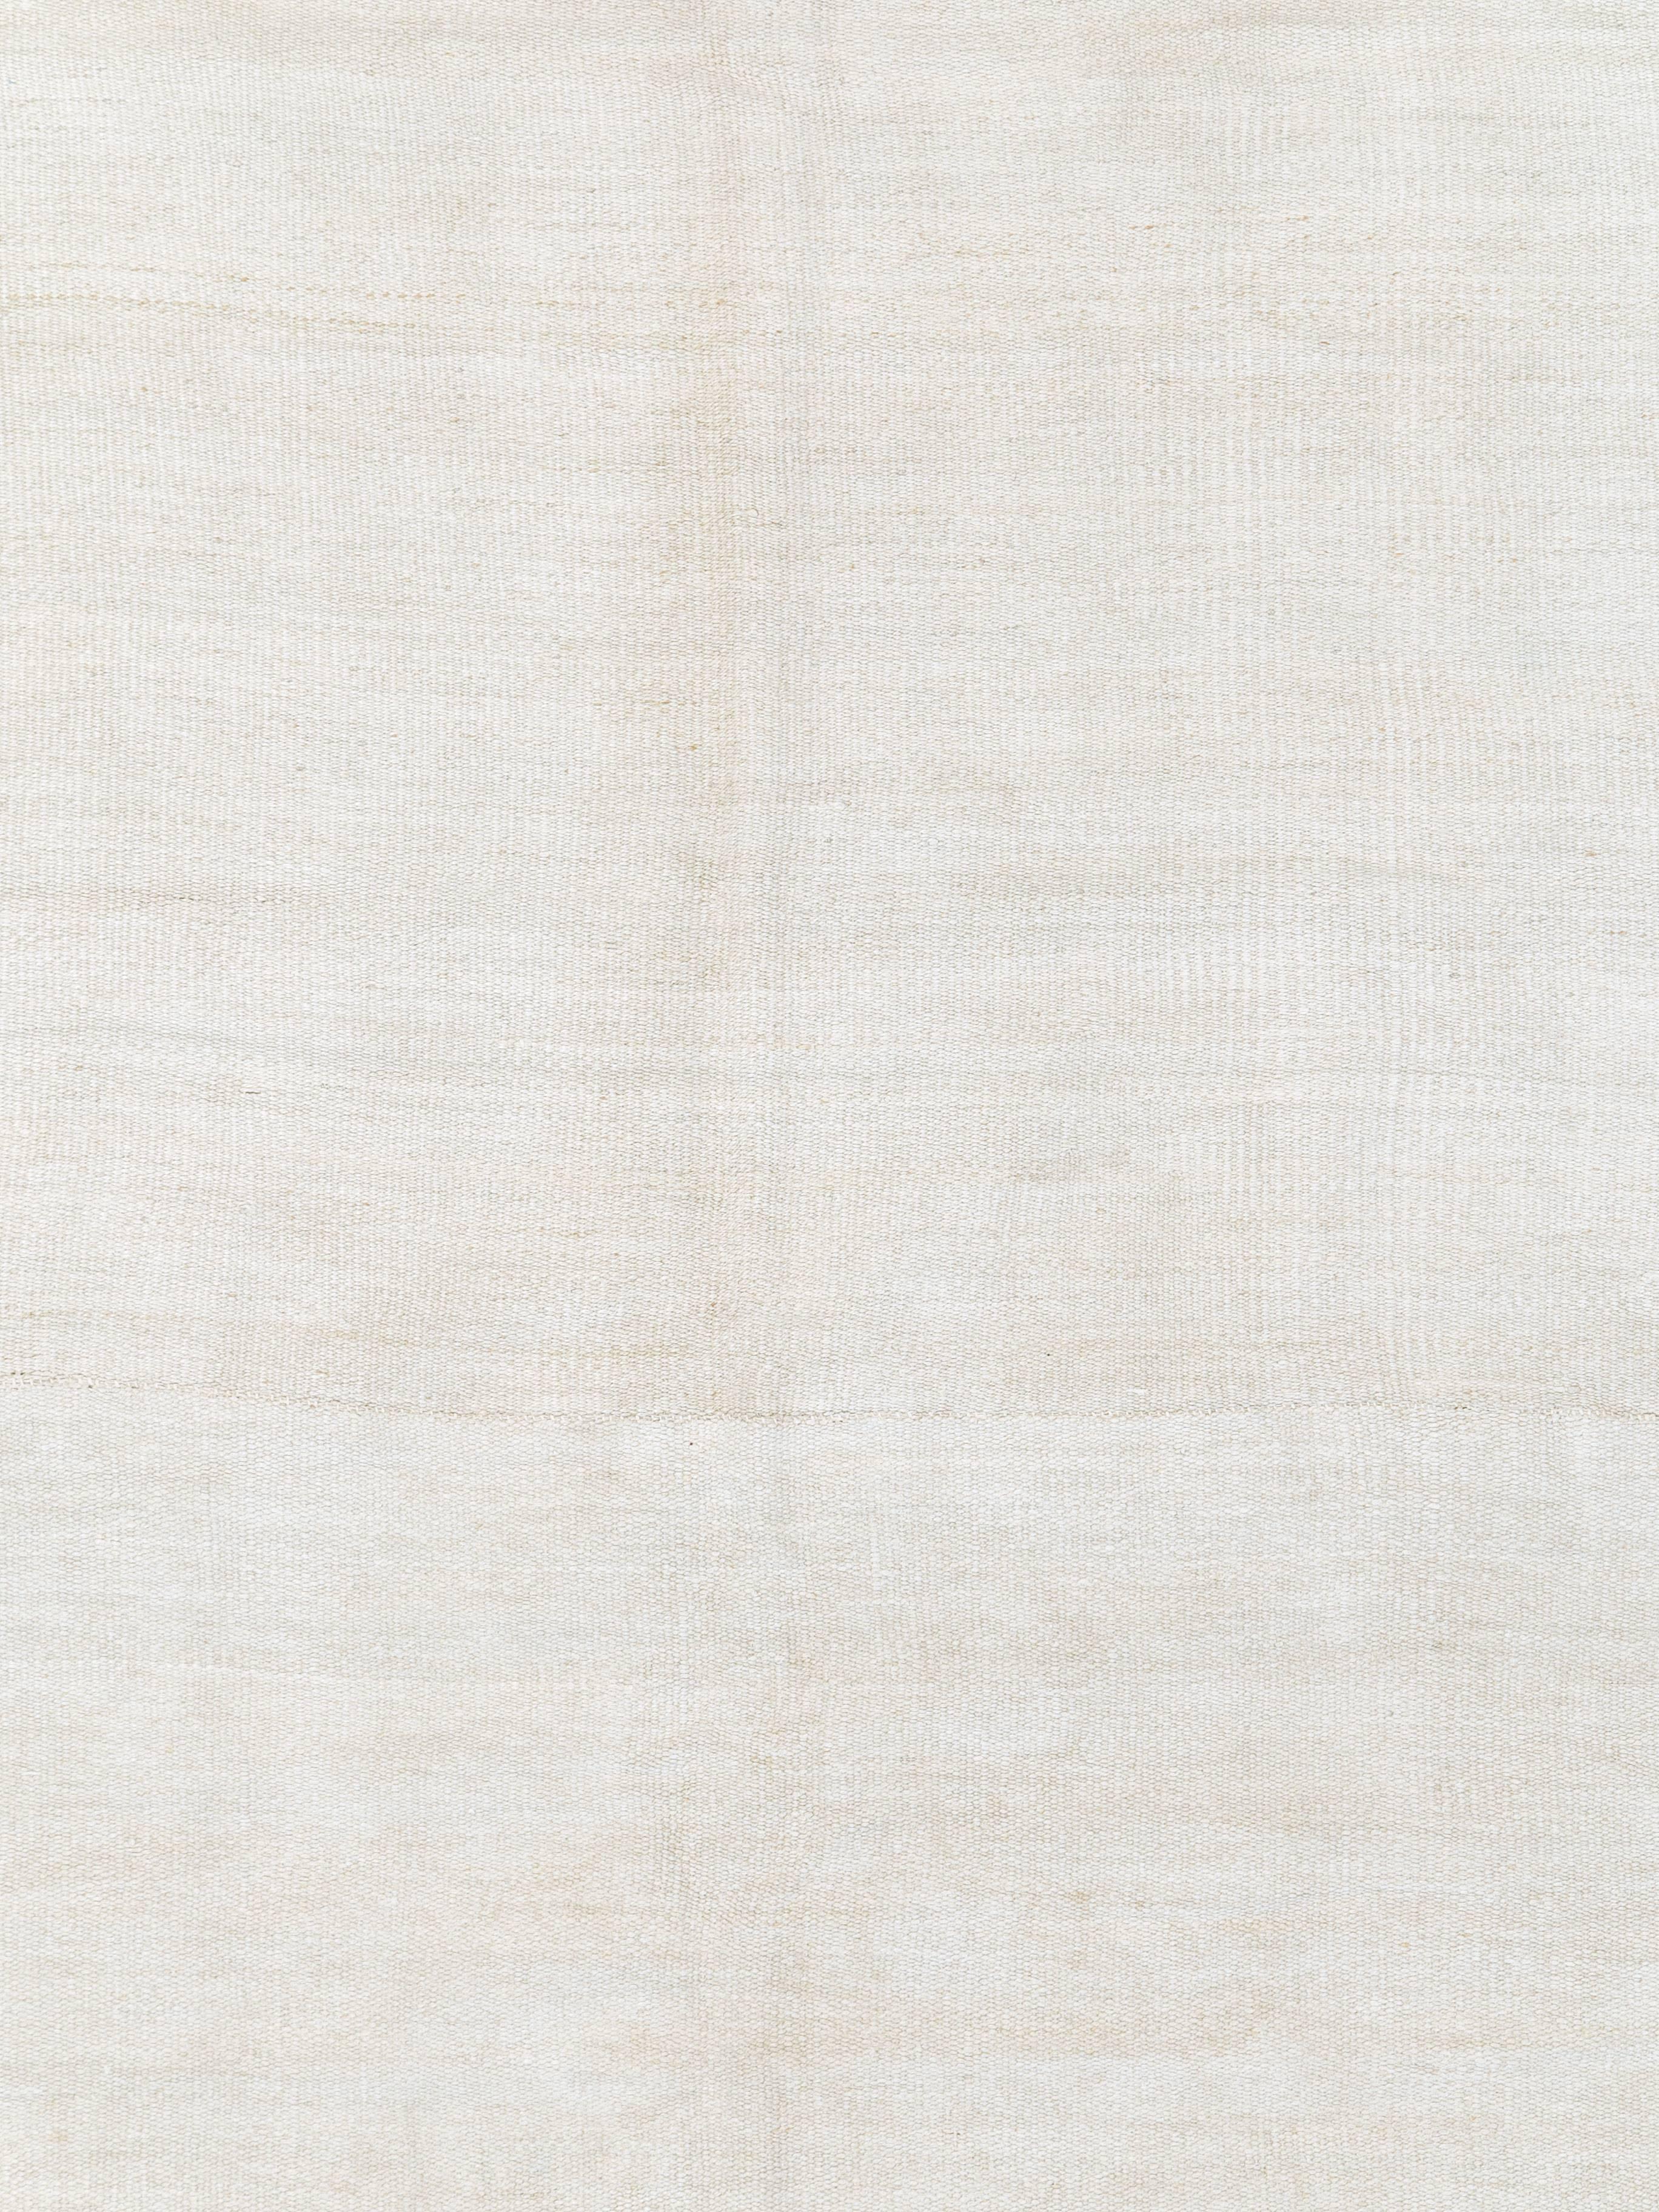 A white vintage Turkish flat-woven carpet from the mid-20th century.